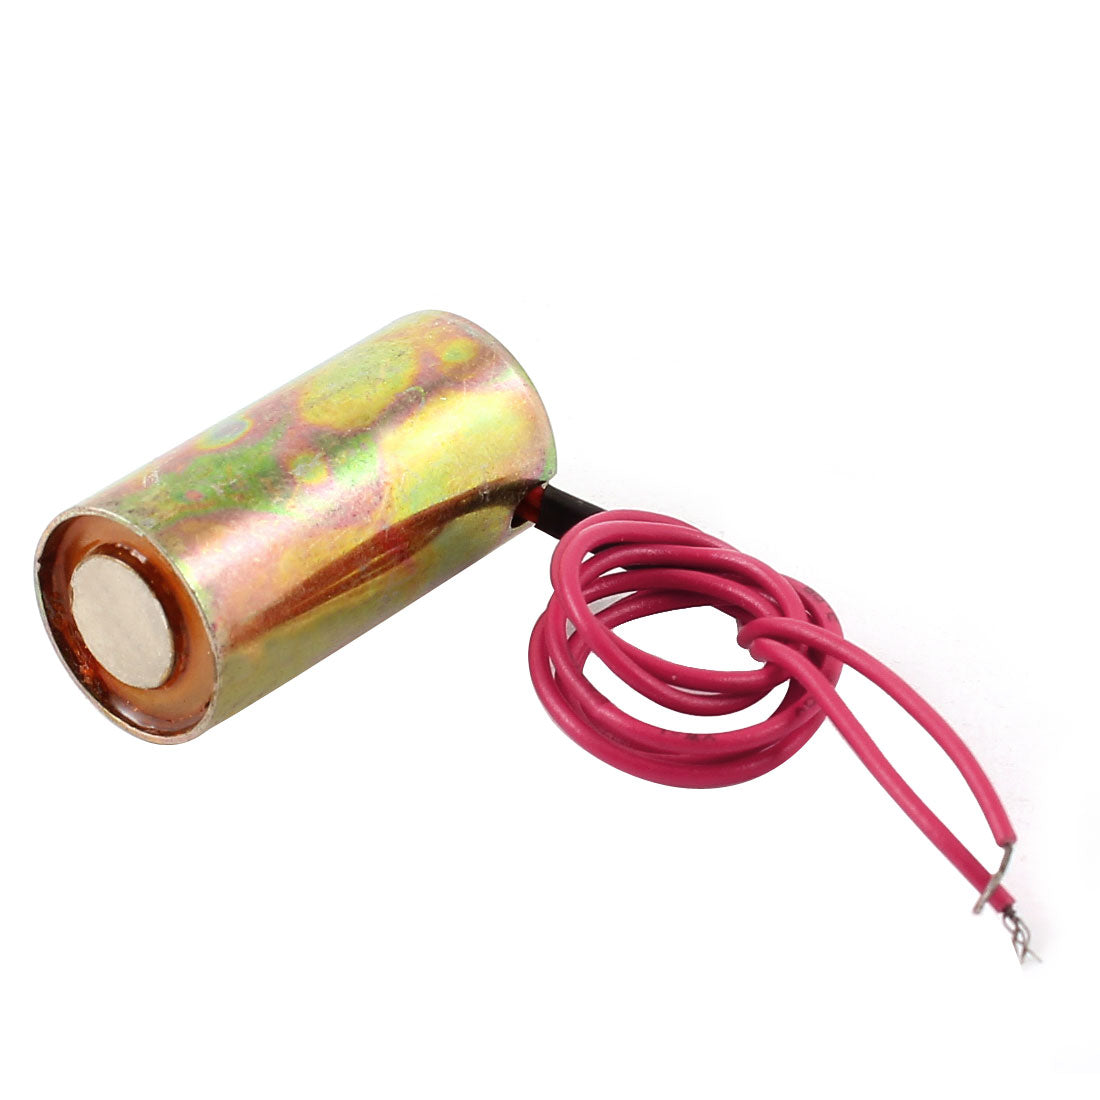 uxcell Uxcell DC 6V 0.17A 1.02W 0mm 3g Lift Holding Electric Solenoid Electromagnet 32 x 16mm